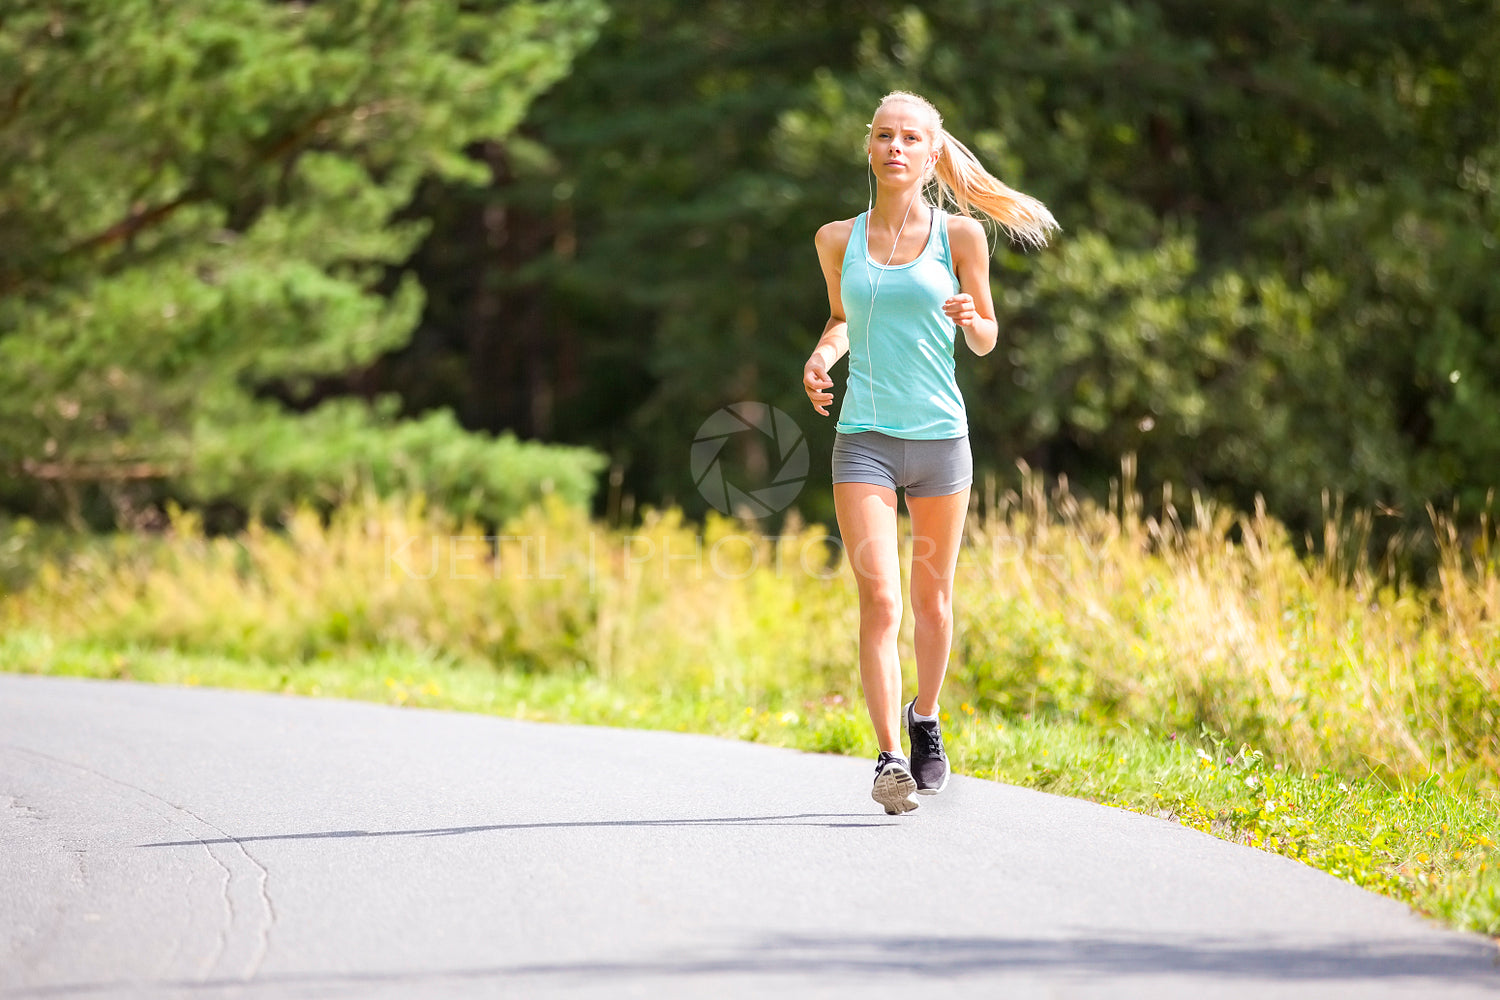 Slim young woman running on a road in the forest